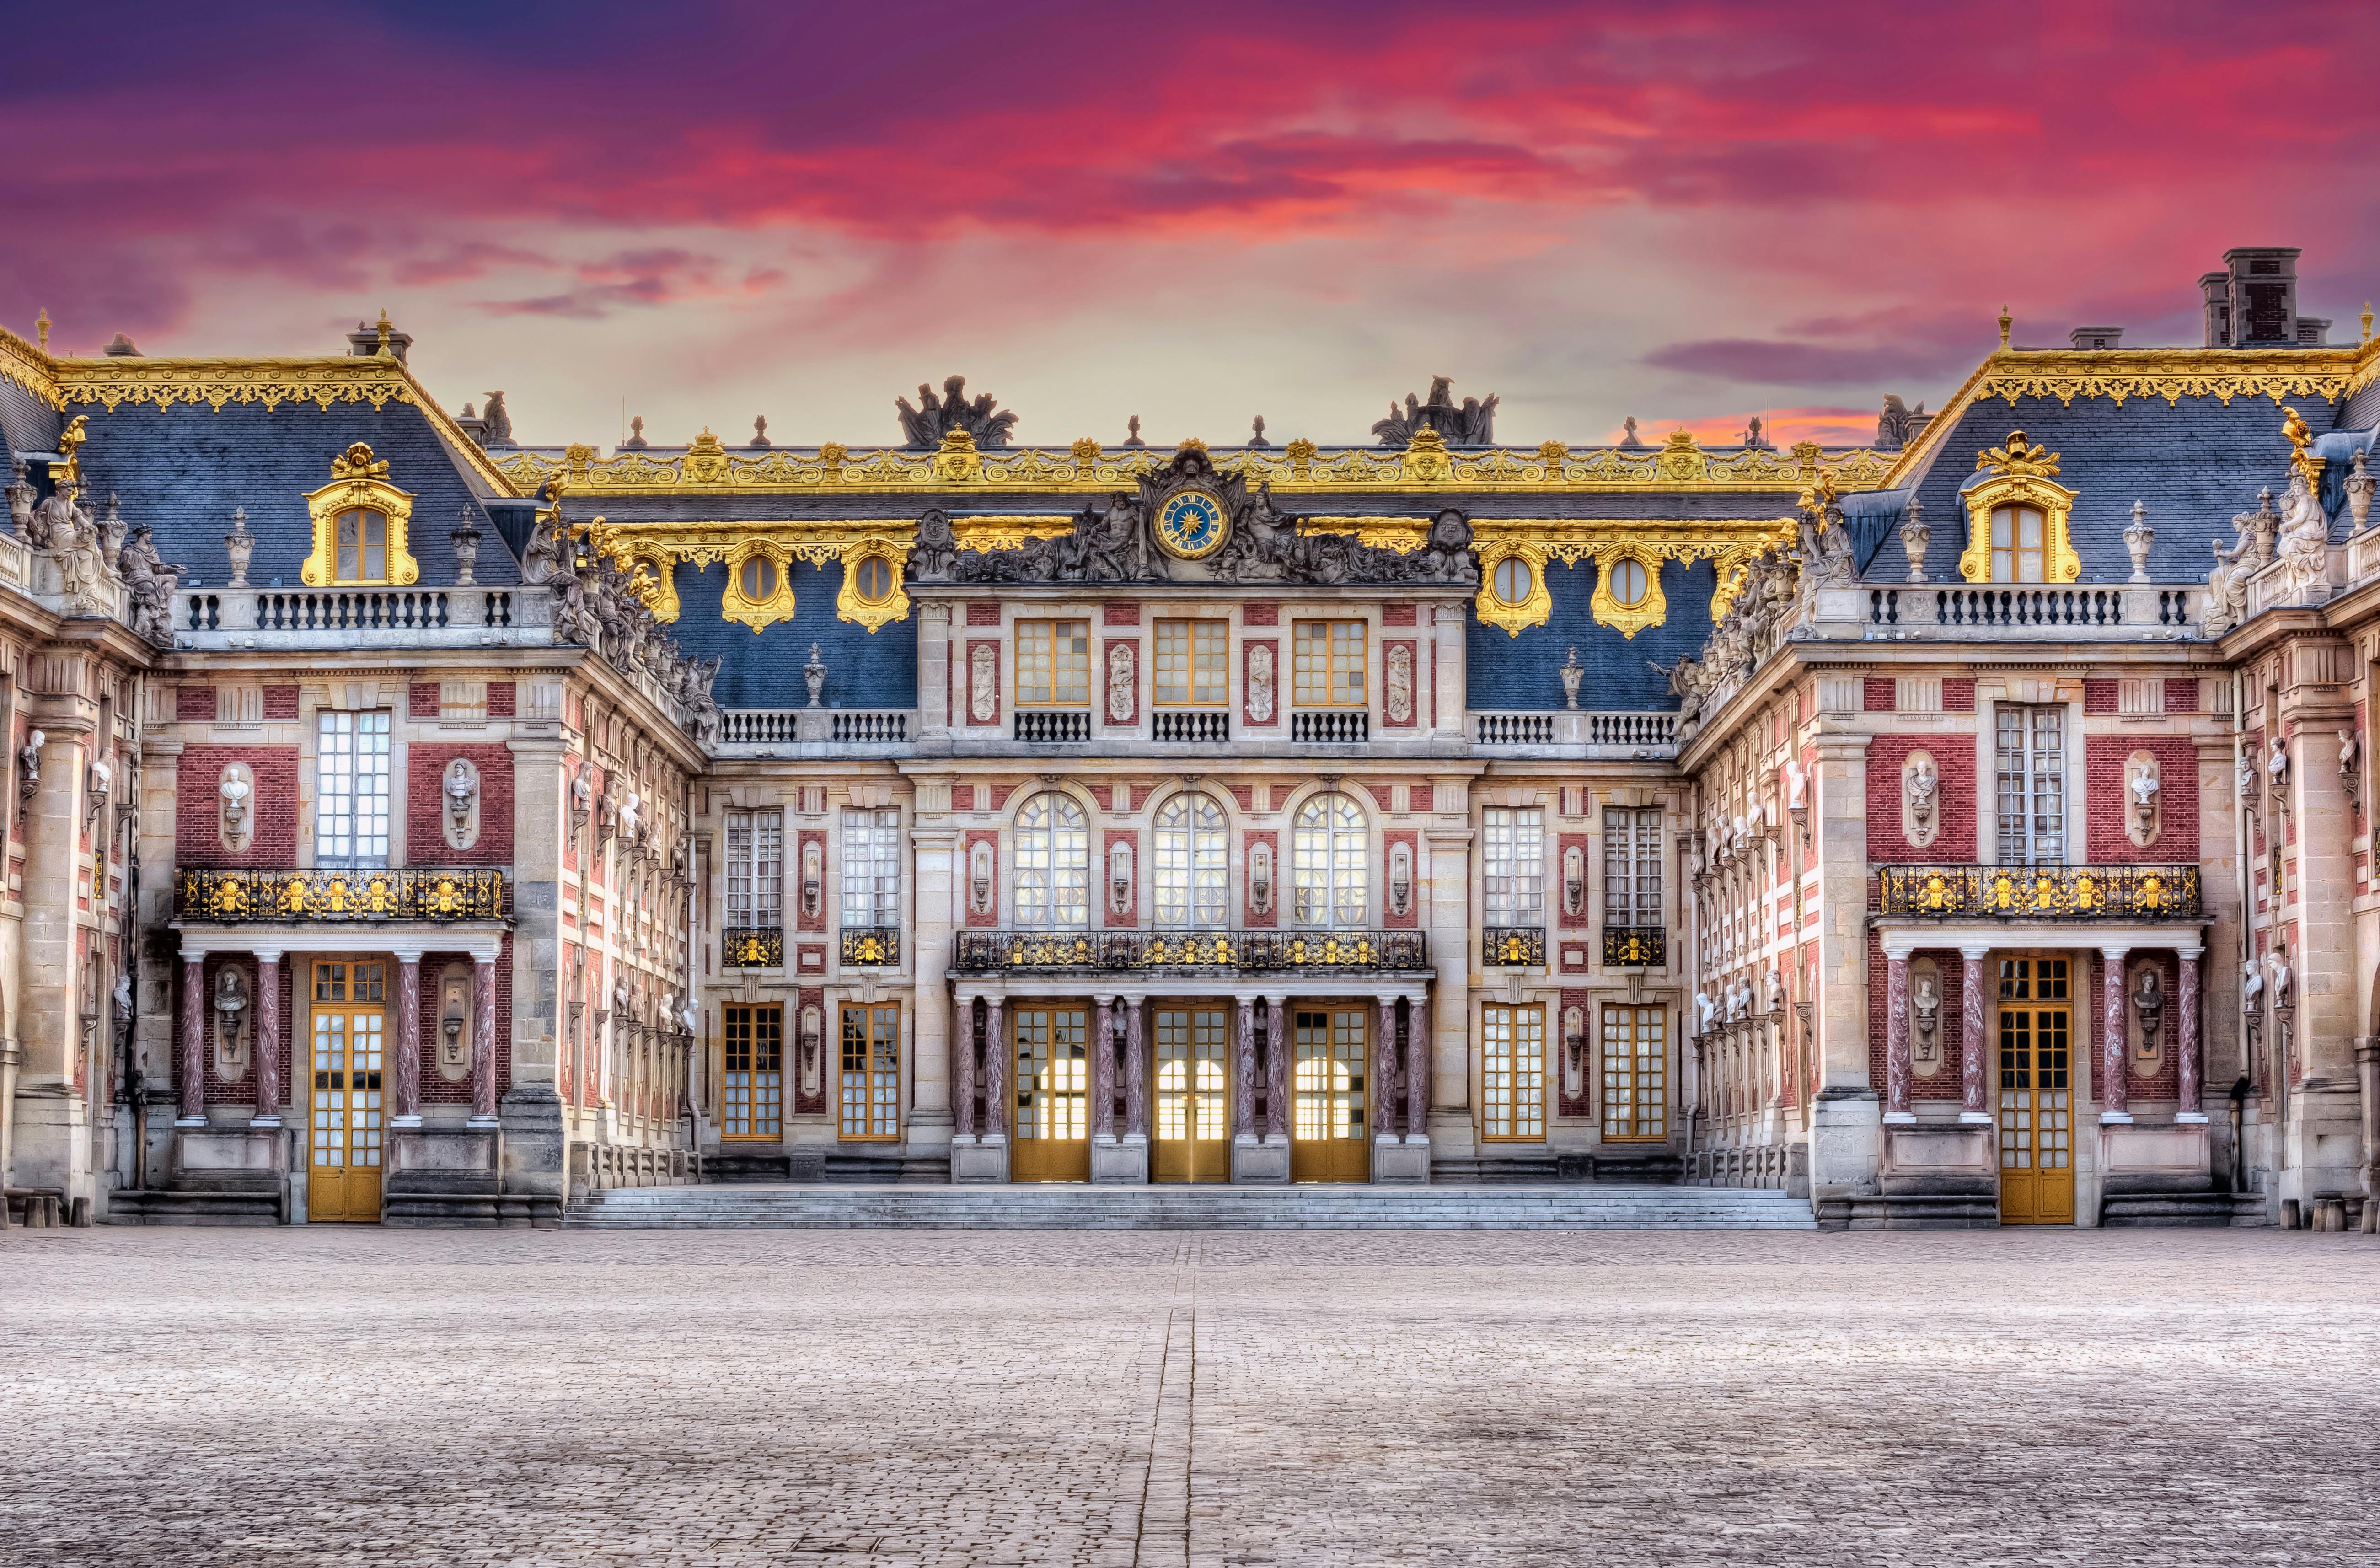 Versailles Palace guided tour from Paris including gardens shows